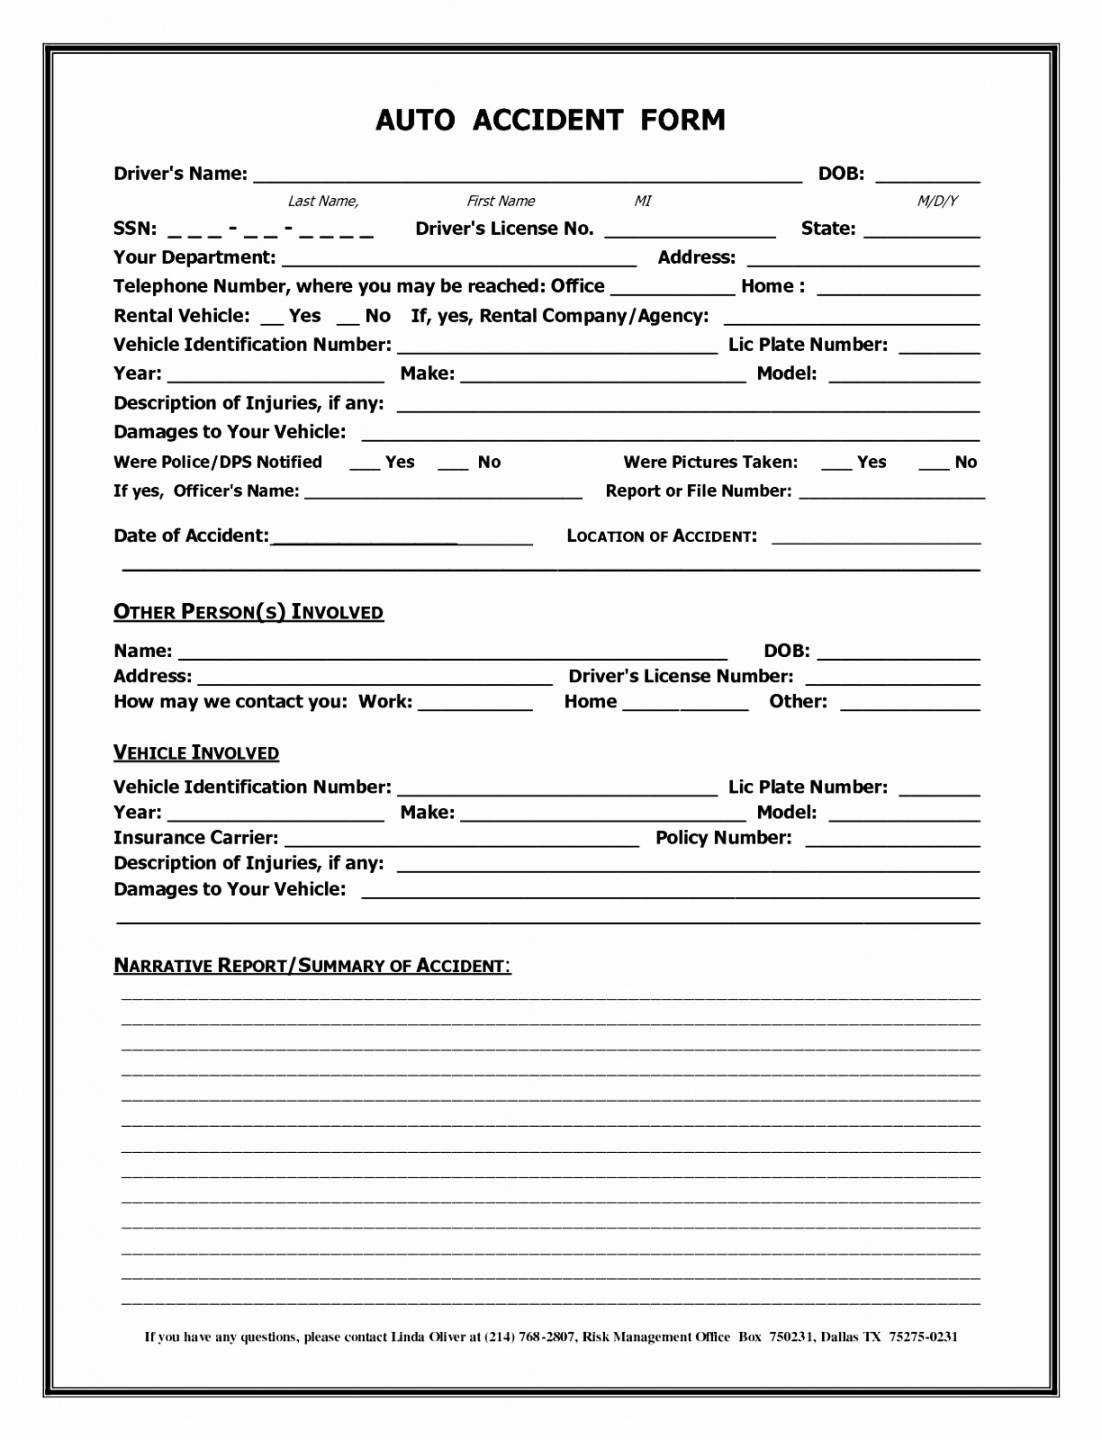 004 Template Ideas Accident Reporting Form Report Uk Of With Regard To Motor Vehicle Accident Report Form Template